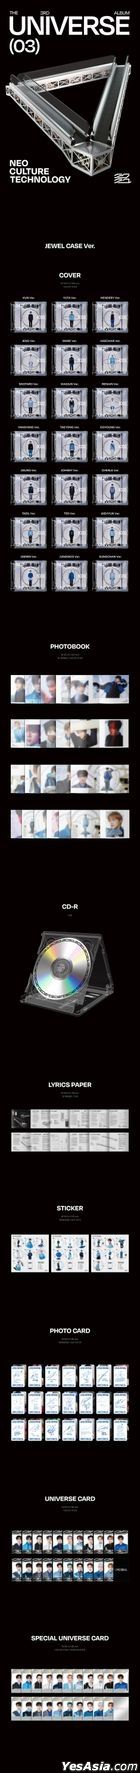 NCT Vol. 3 - Universe (Jewel Case Version) (Johnny Version) + Poster in Tube